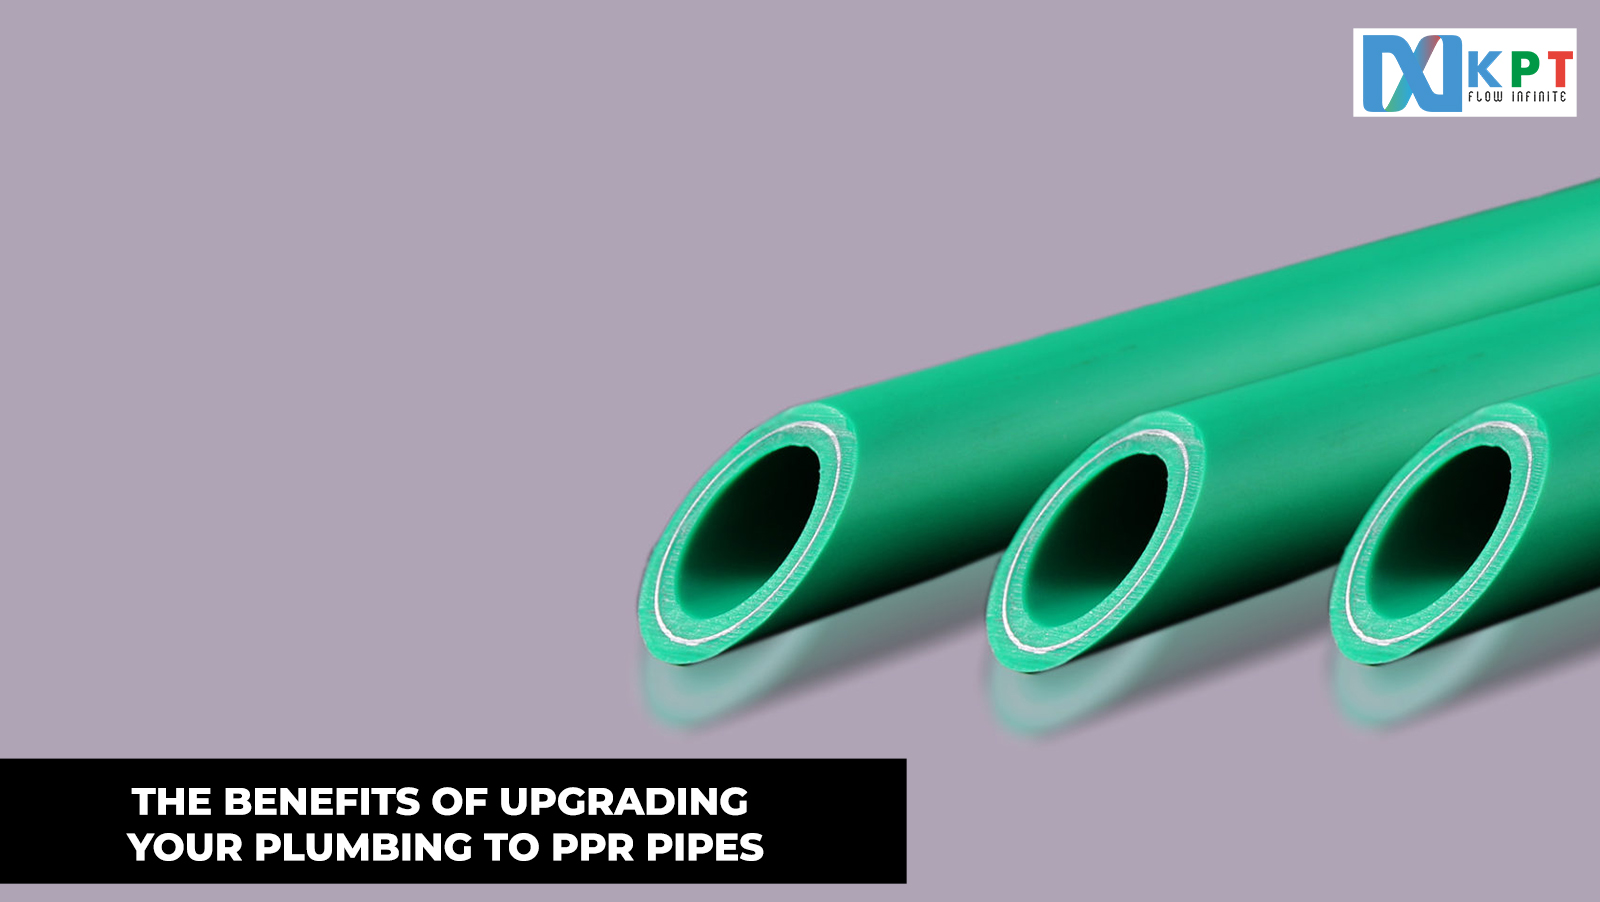 The Benefits of Upgrading Your Plumbing to PPR Pipes